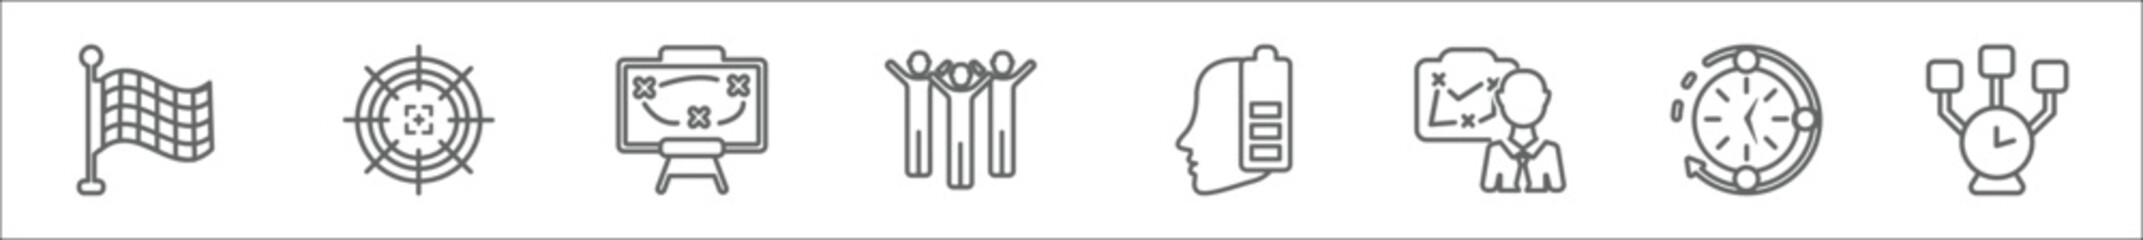 outline set of productivity line icons. linear vector icons such as racing flag, gun target, tactics, competition, mind charge, businessman and tactics, time passing, time hierarchy